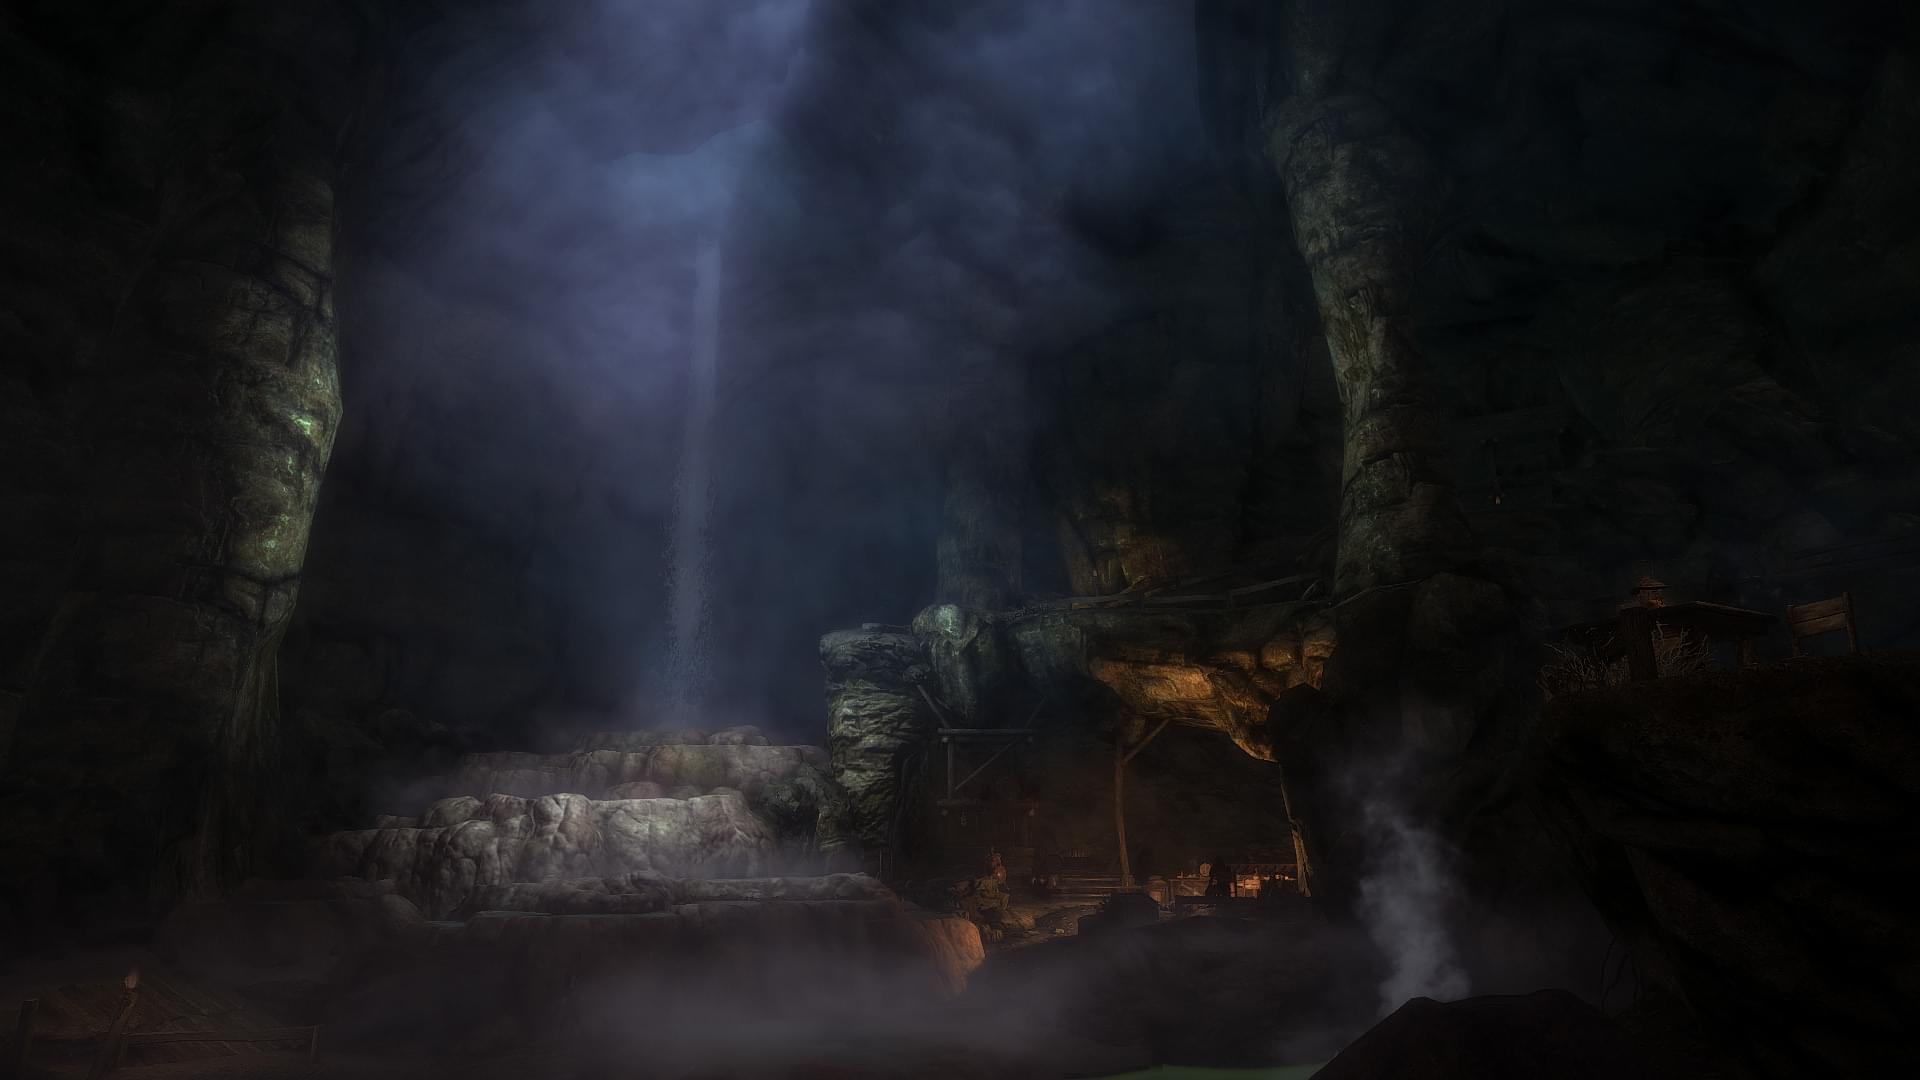 A large hot spring waterfall in a cave